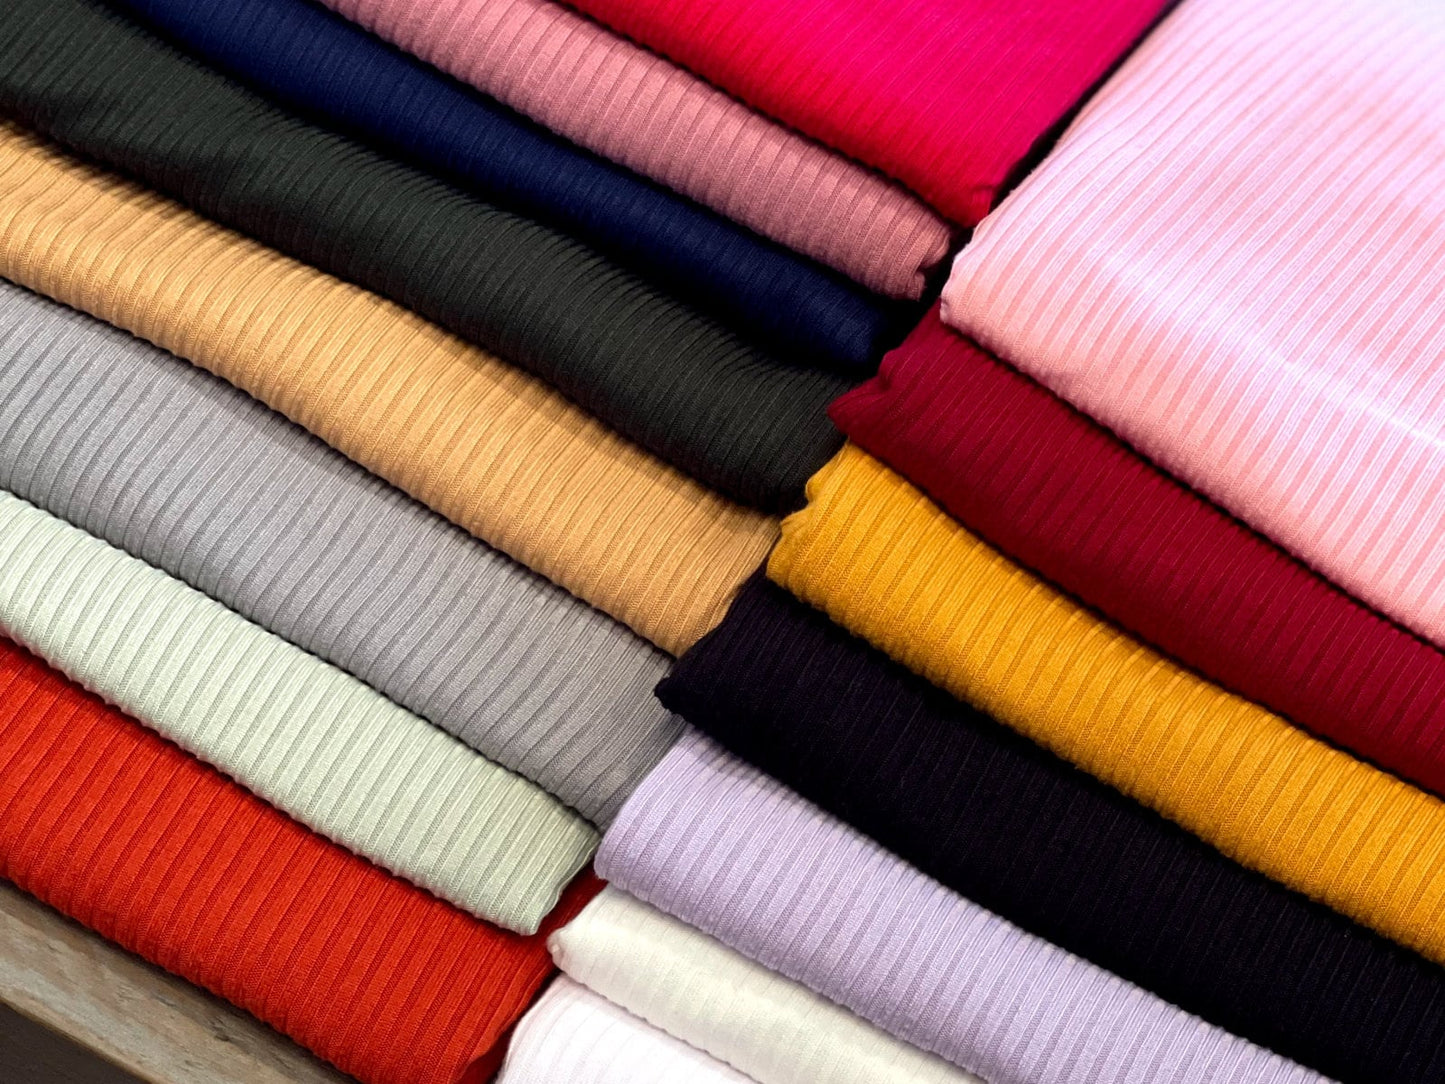 Ivory Rib Knit Fabric by the Yard Ribbed Jersey Stretchy Soft Polyester Stretch Fabric 1 Yard